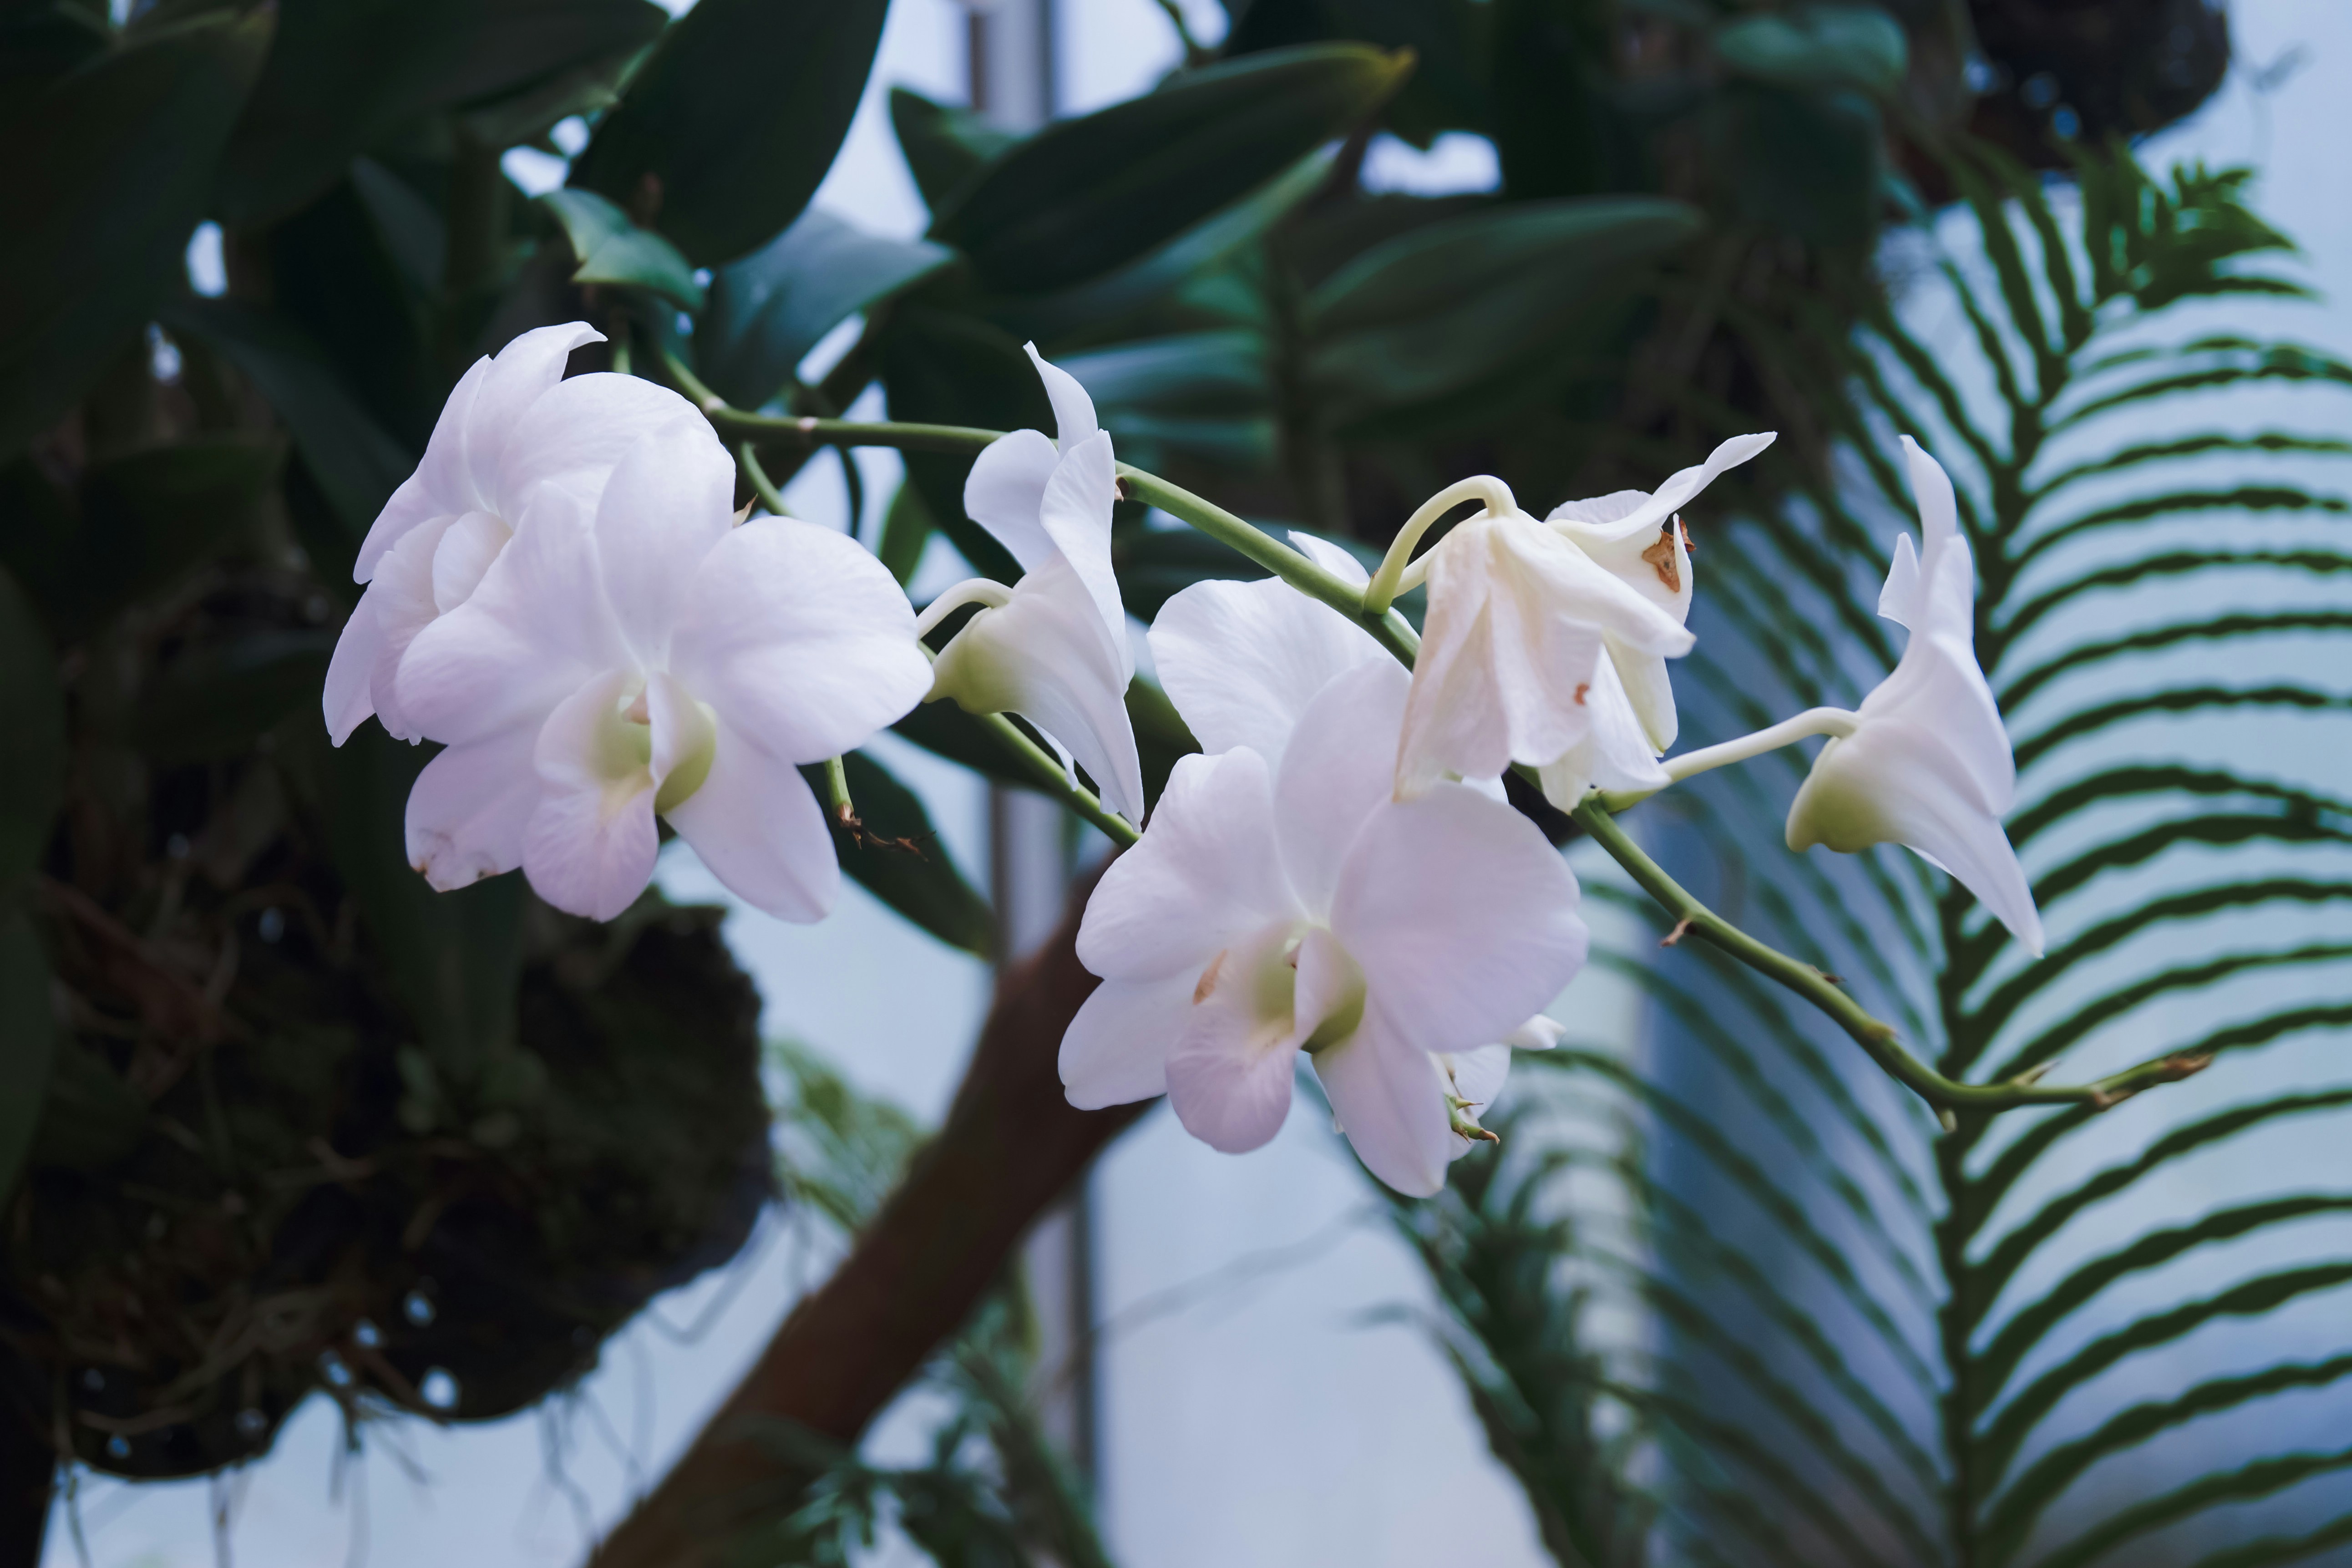 Photo of white dendrobium orchid, taken in 2016.